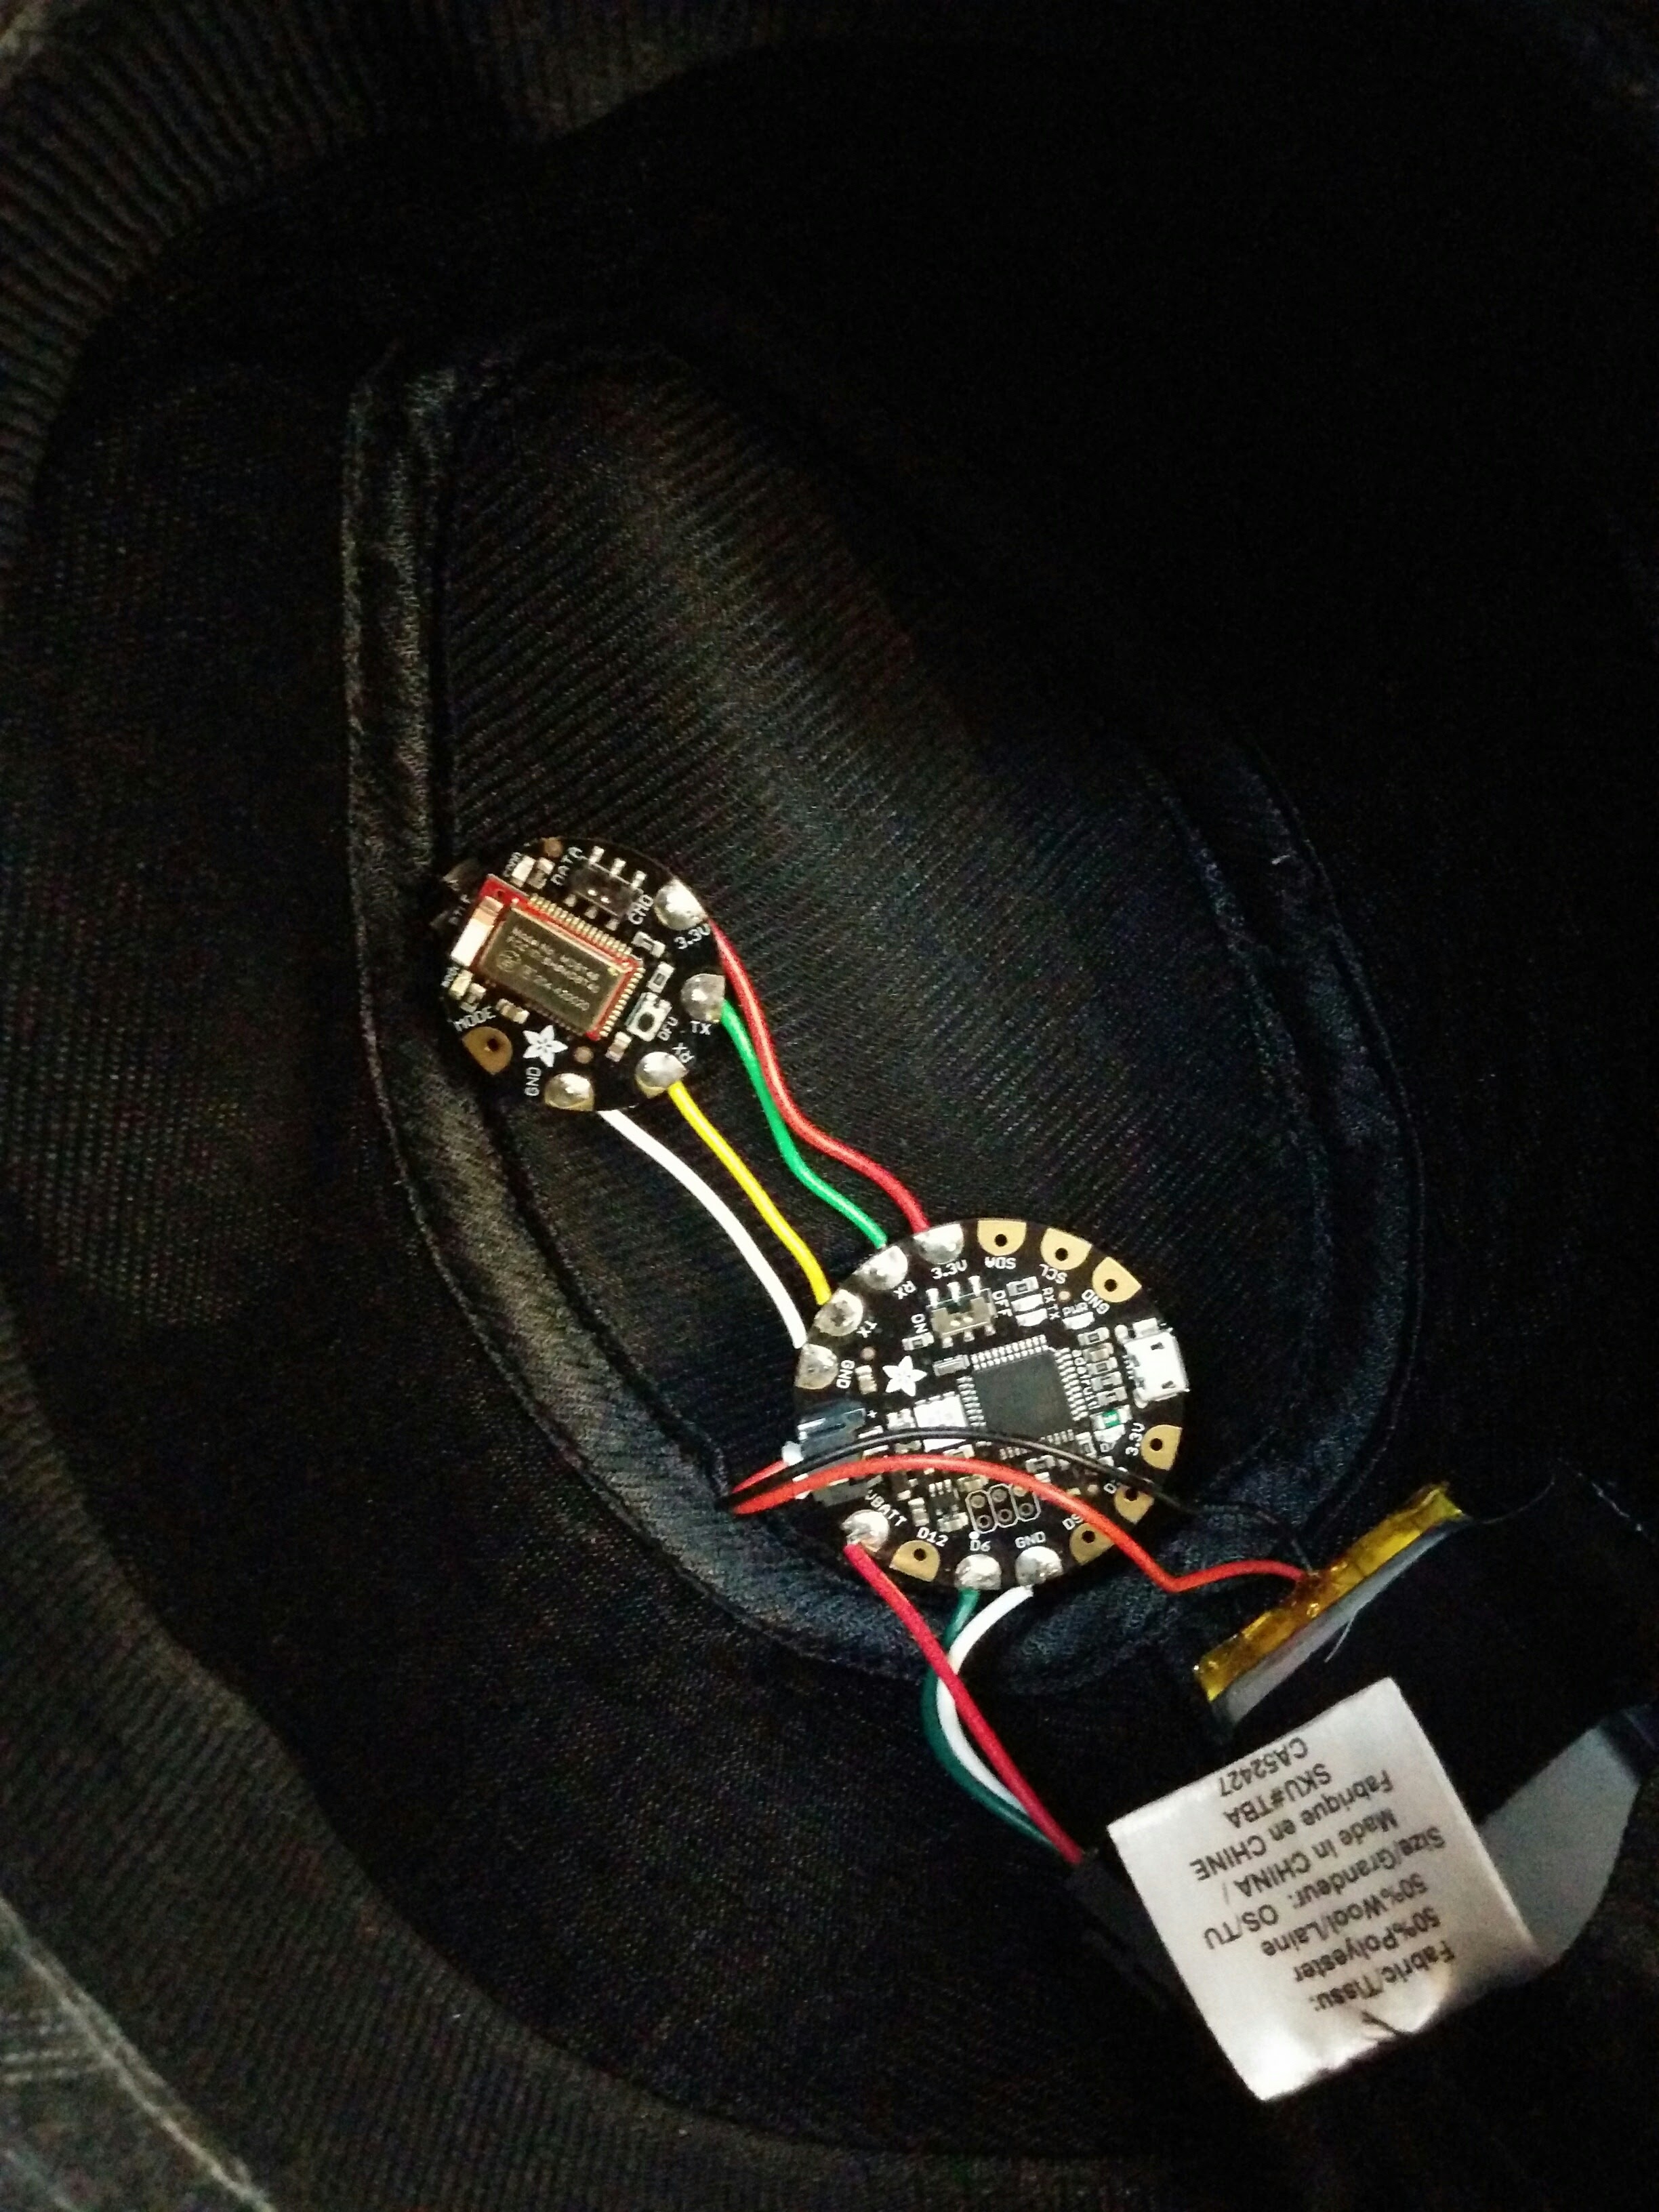 Inside of the hat